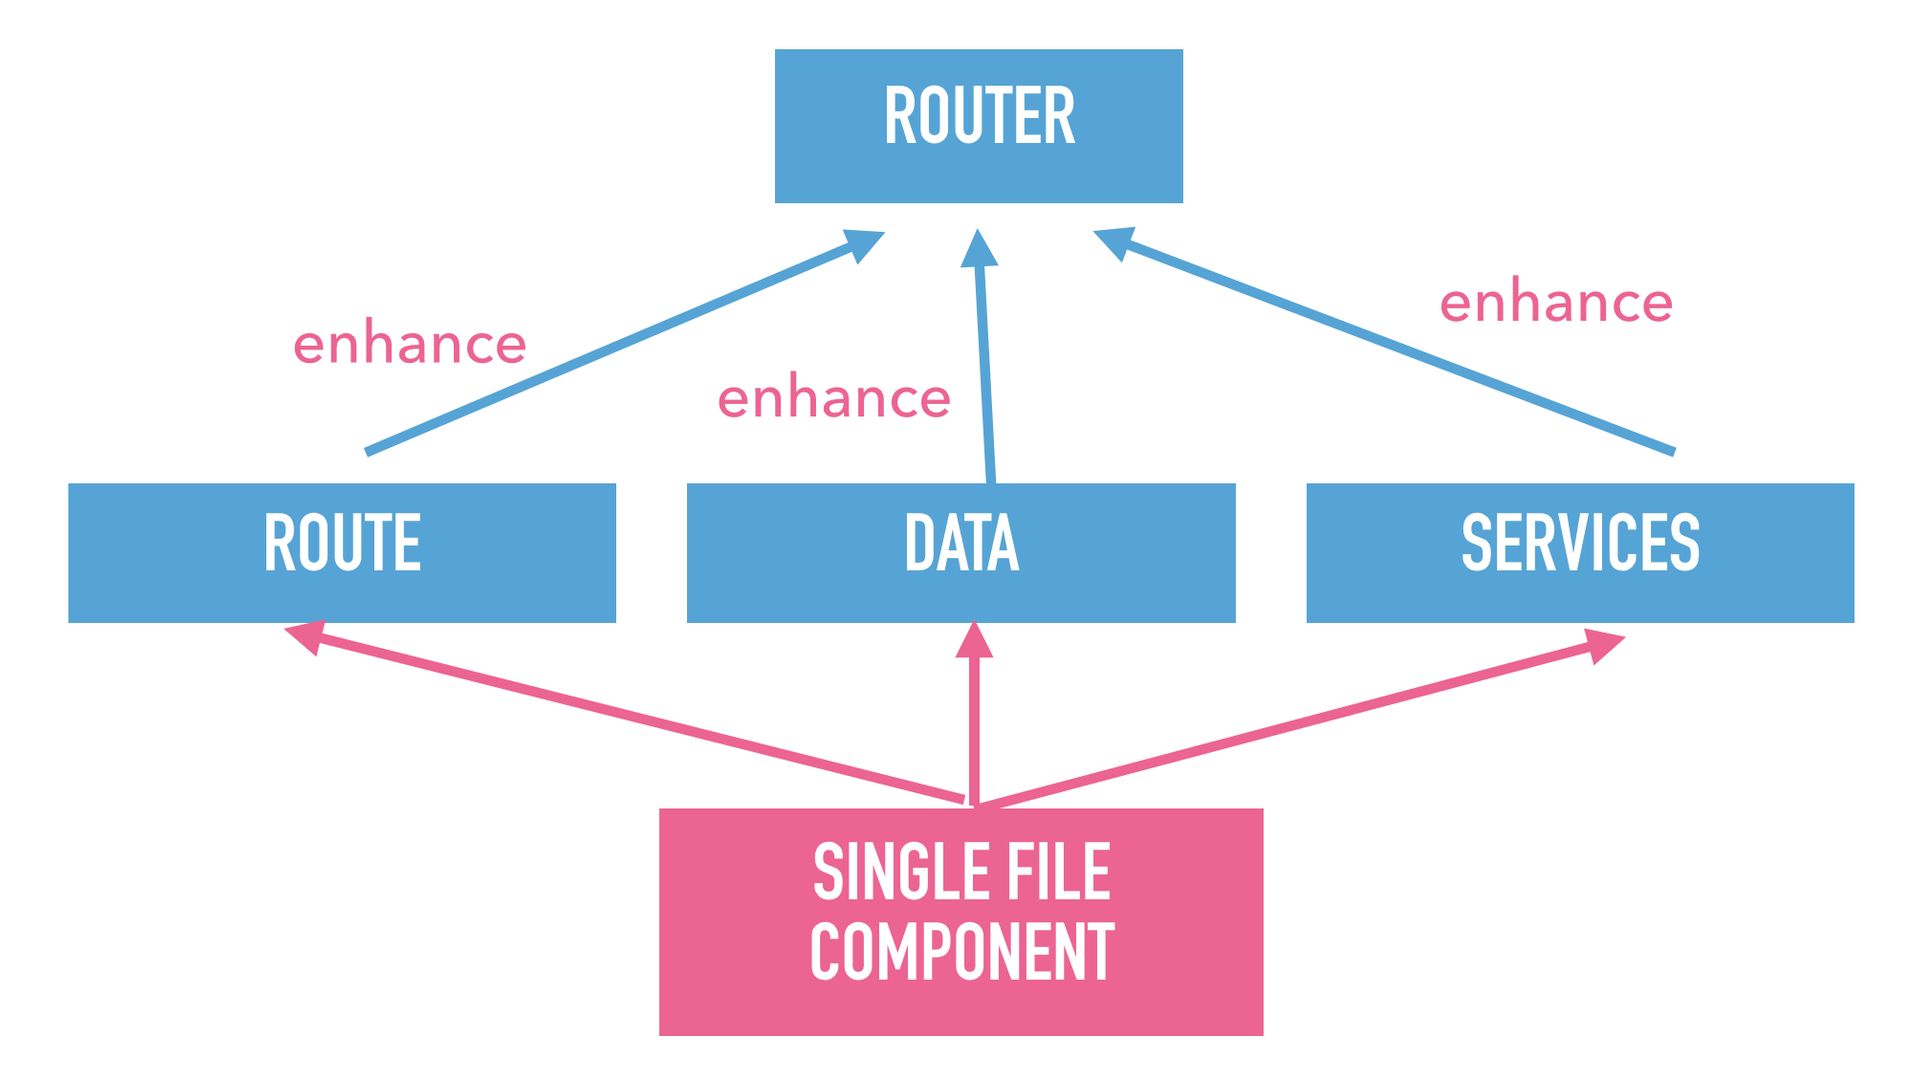 Slide text: Single file component pointing to its parts that enhance a router.